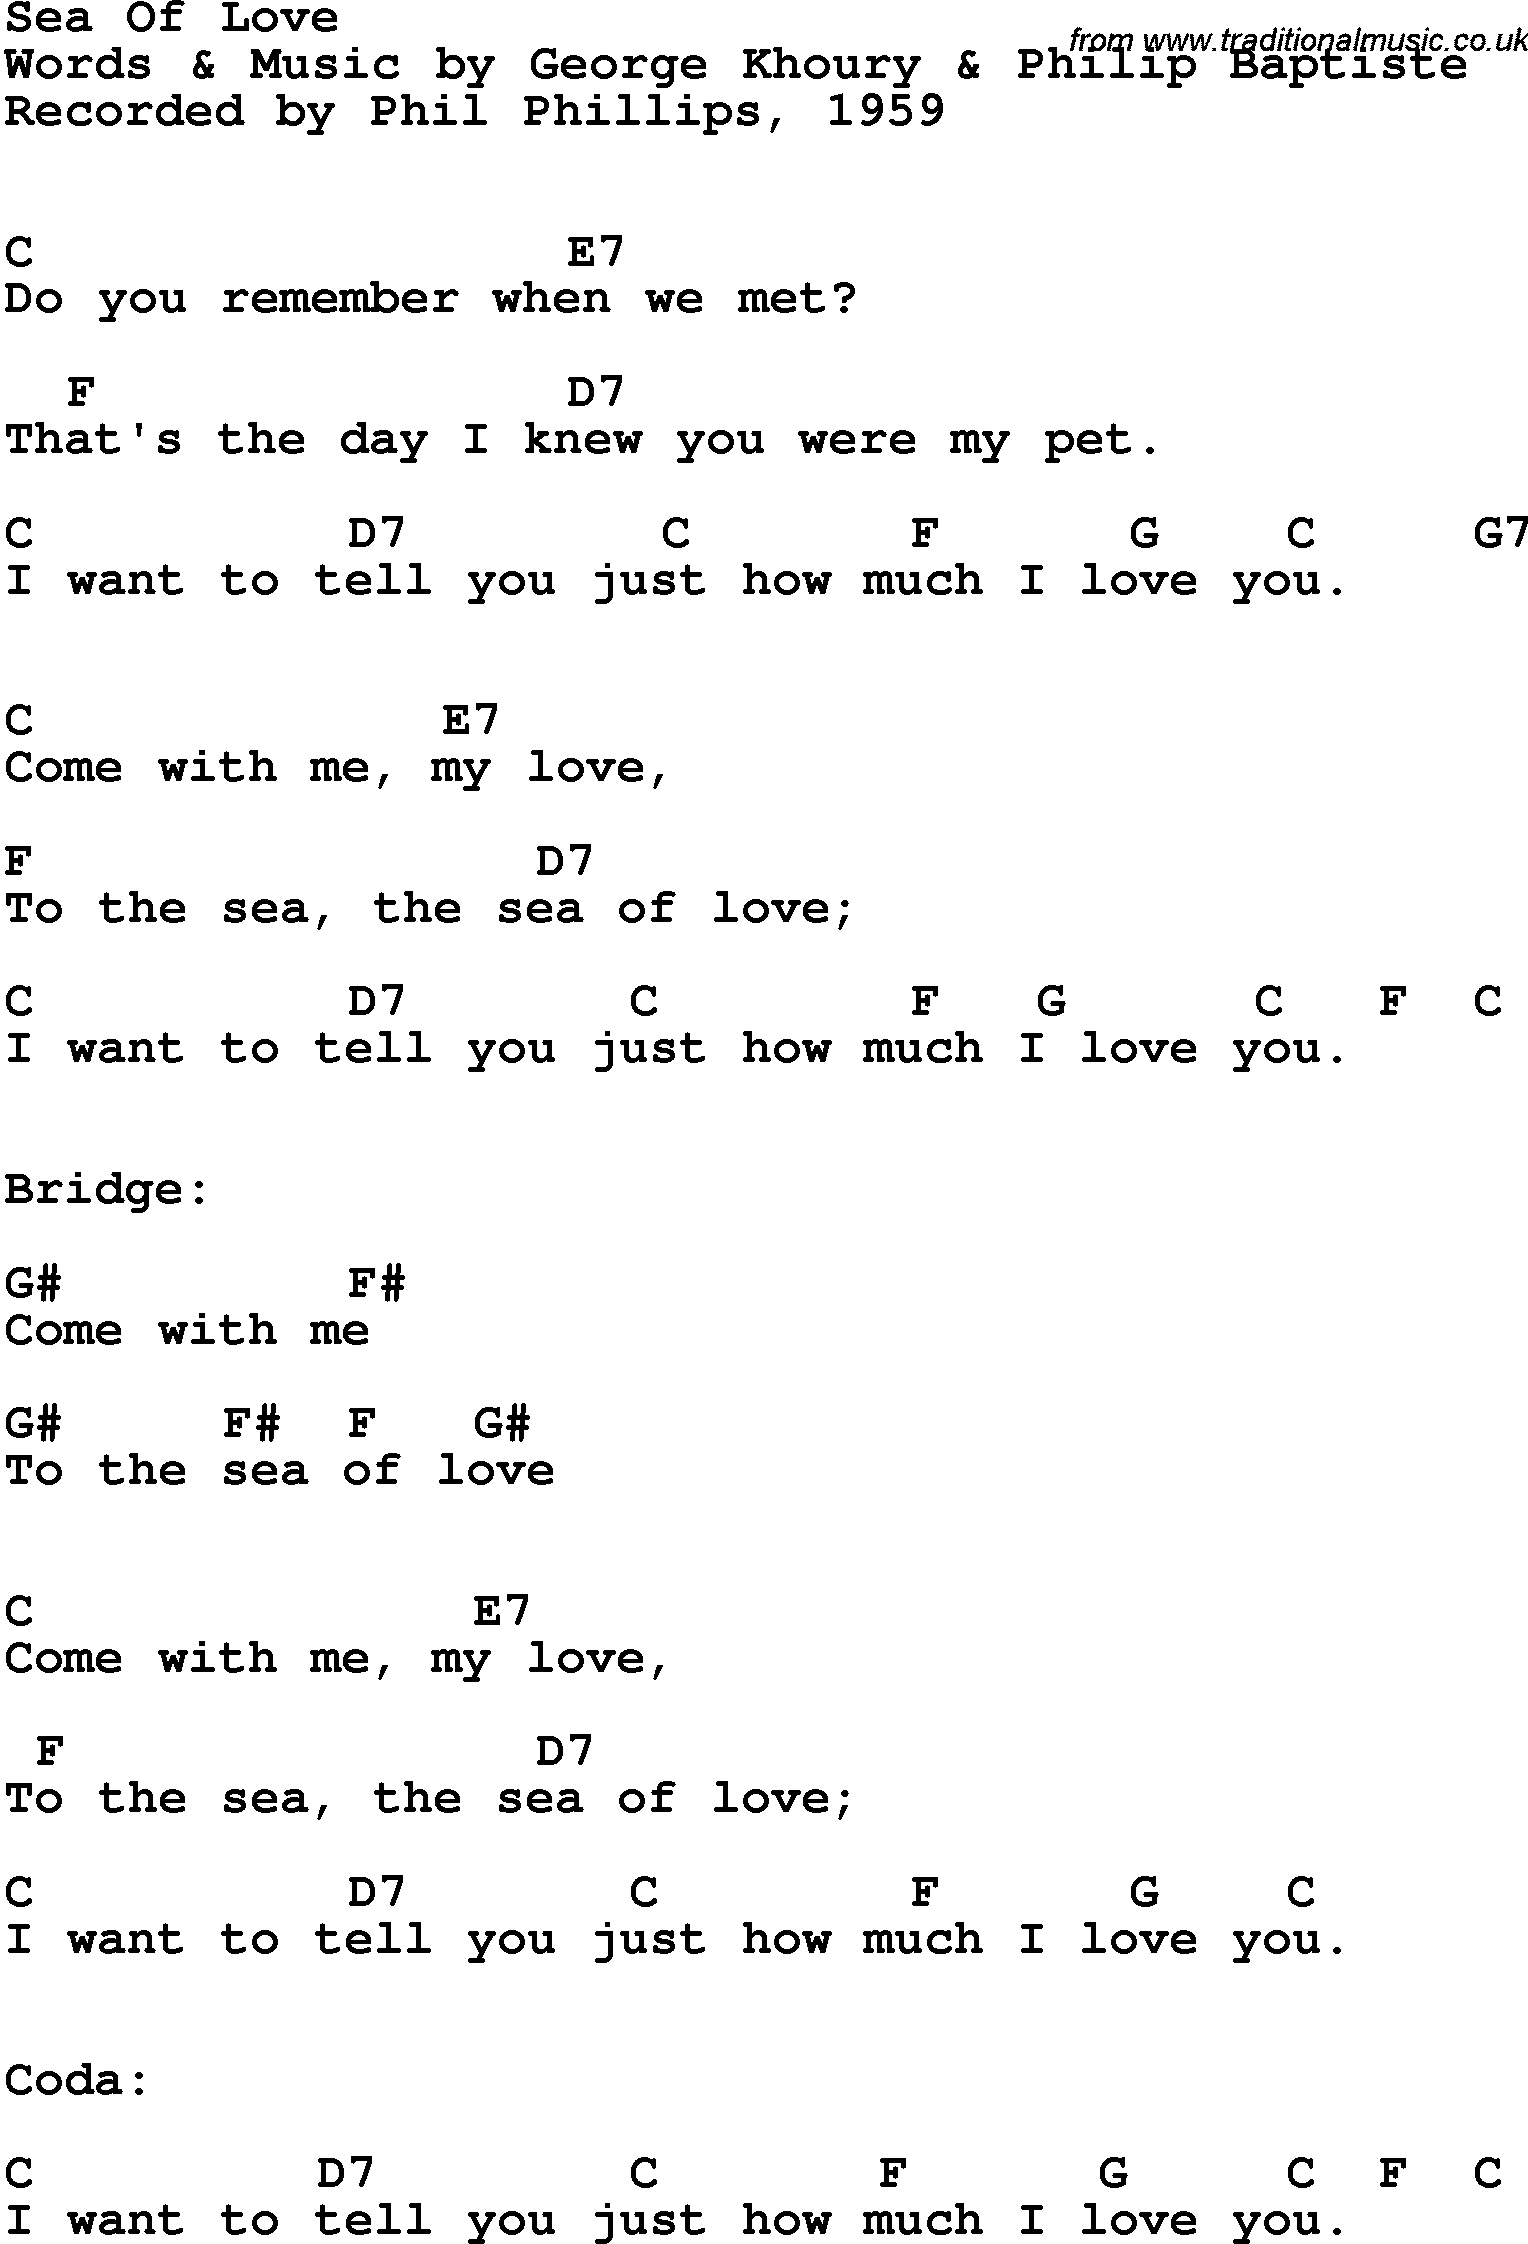 Song Lyrics with guitar chords for Sea Of Love - Phil Phillips, 1959